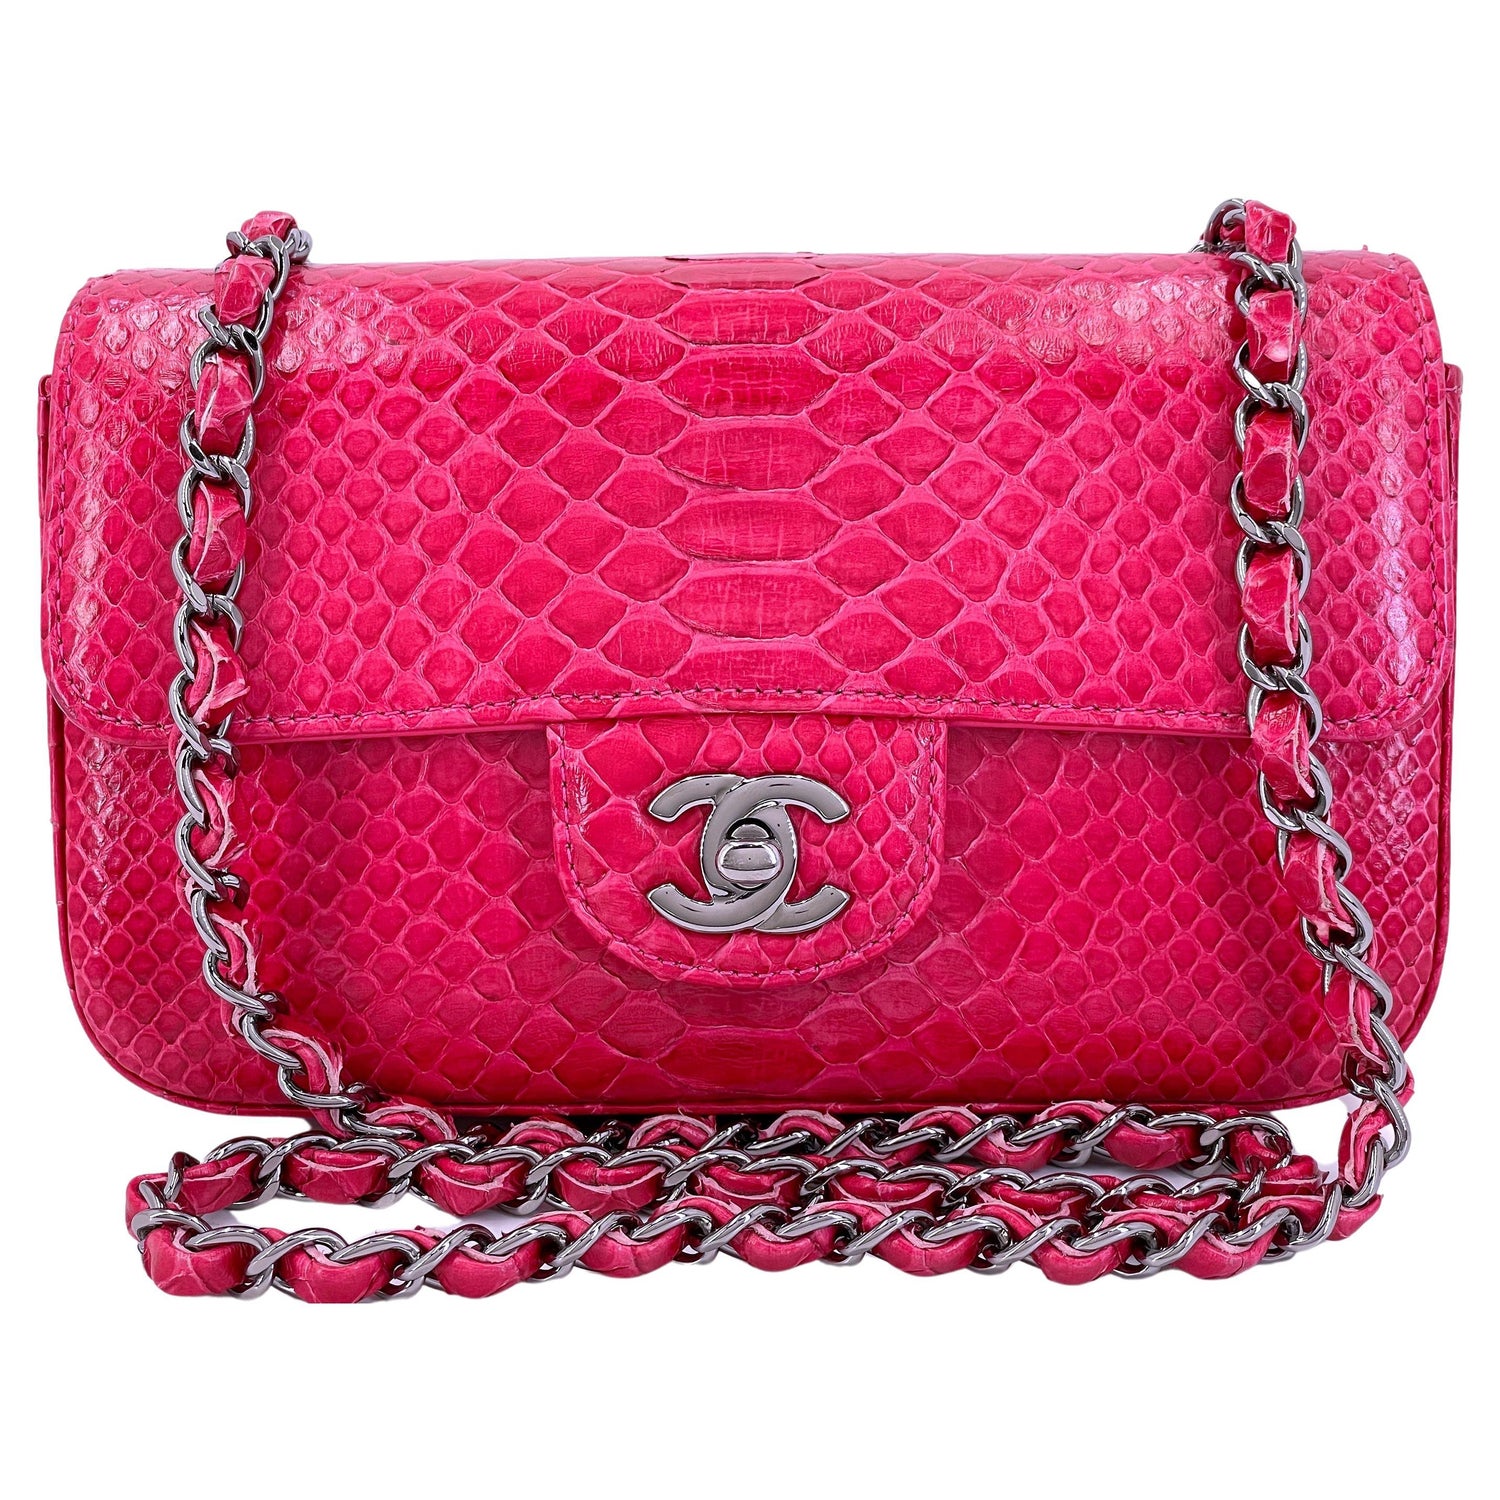 Chanel Small Rectangular Diana Flap in Blue